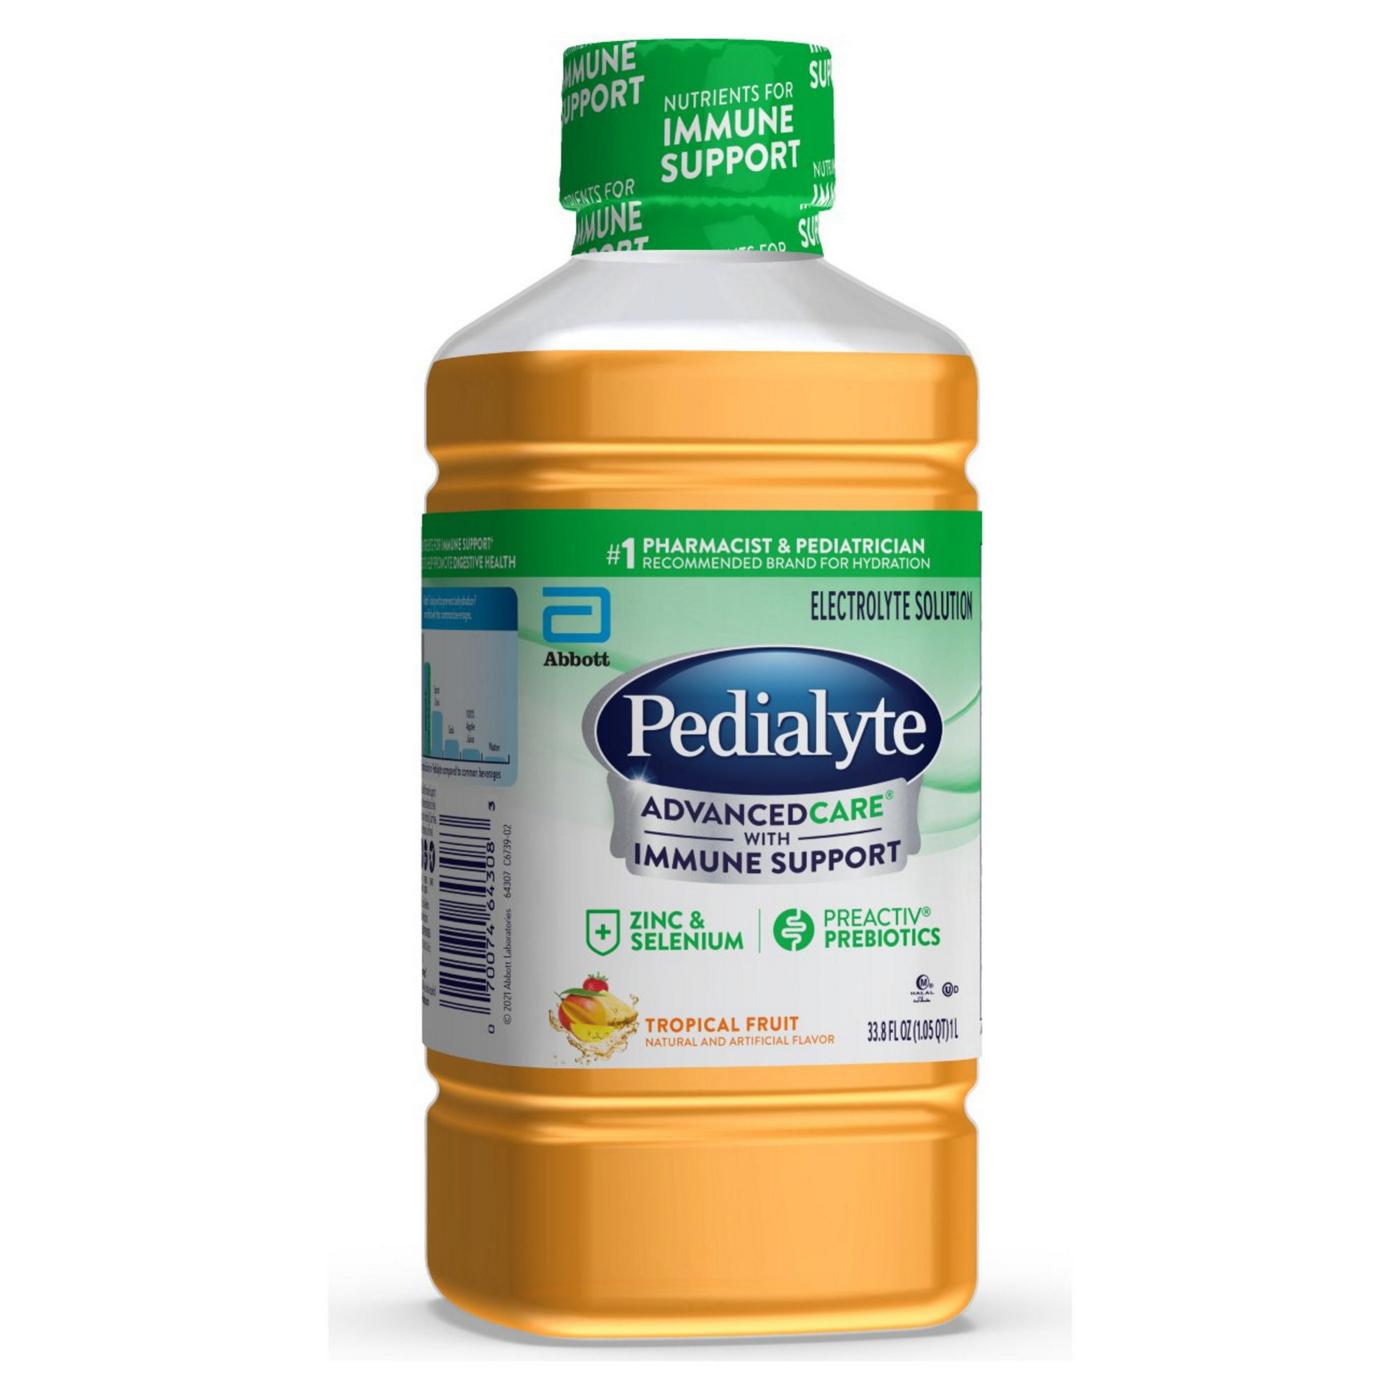 Pedialyte AdvancedCare Electrolyte Solution - Tropical Fruit; image 8 of 8